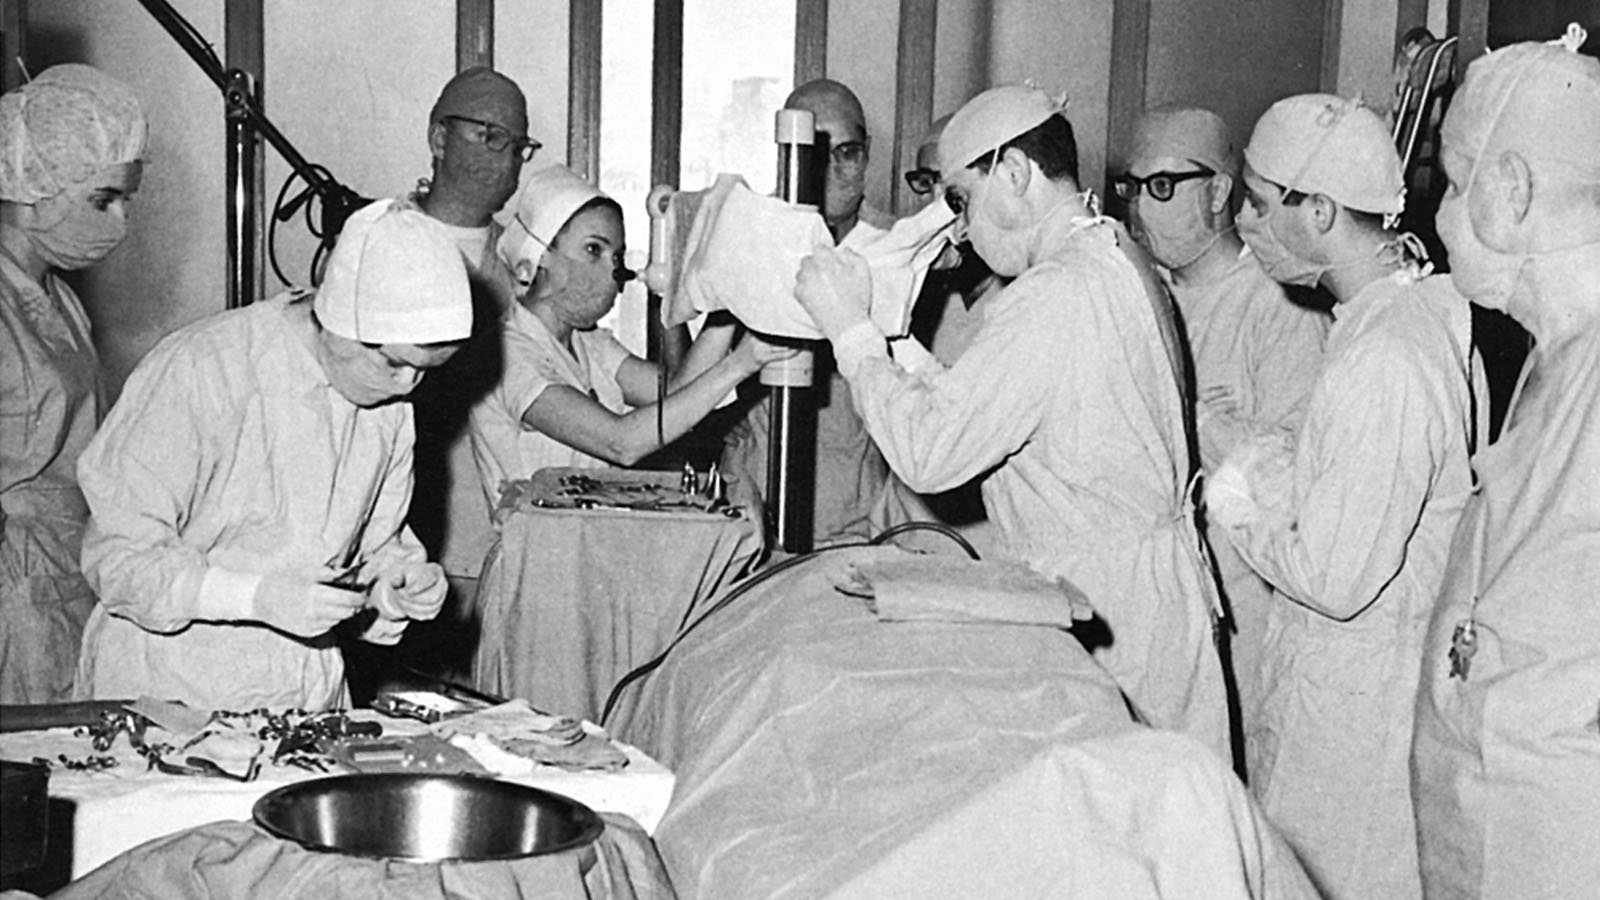 PCOM medical students learning during a surgery demonstration in the 1920s